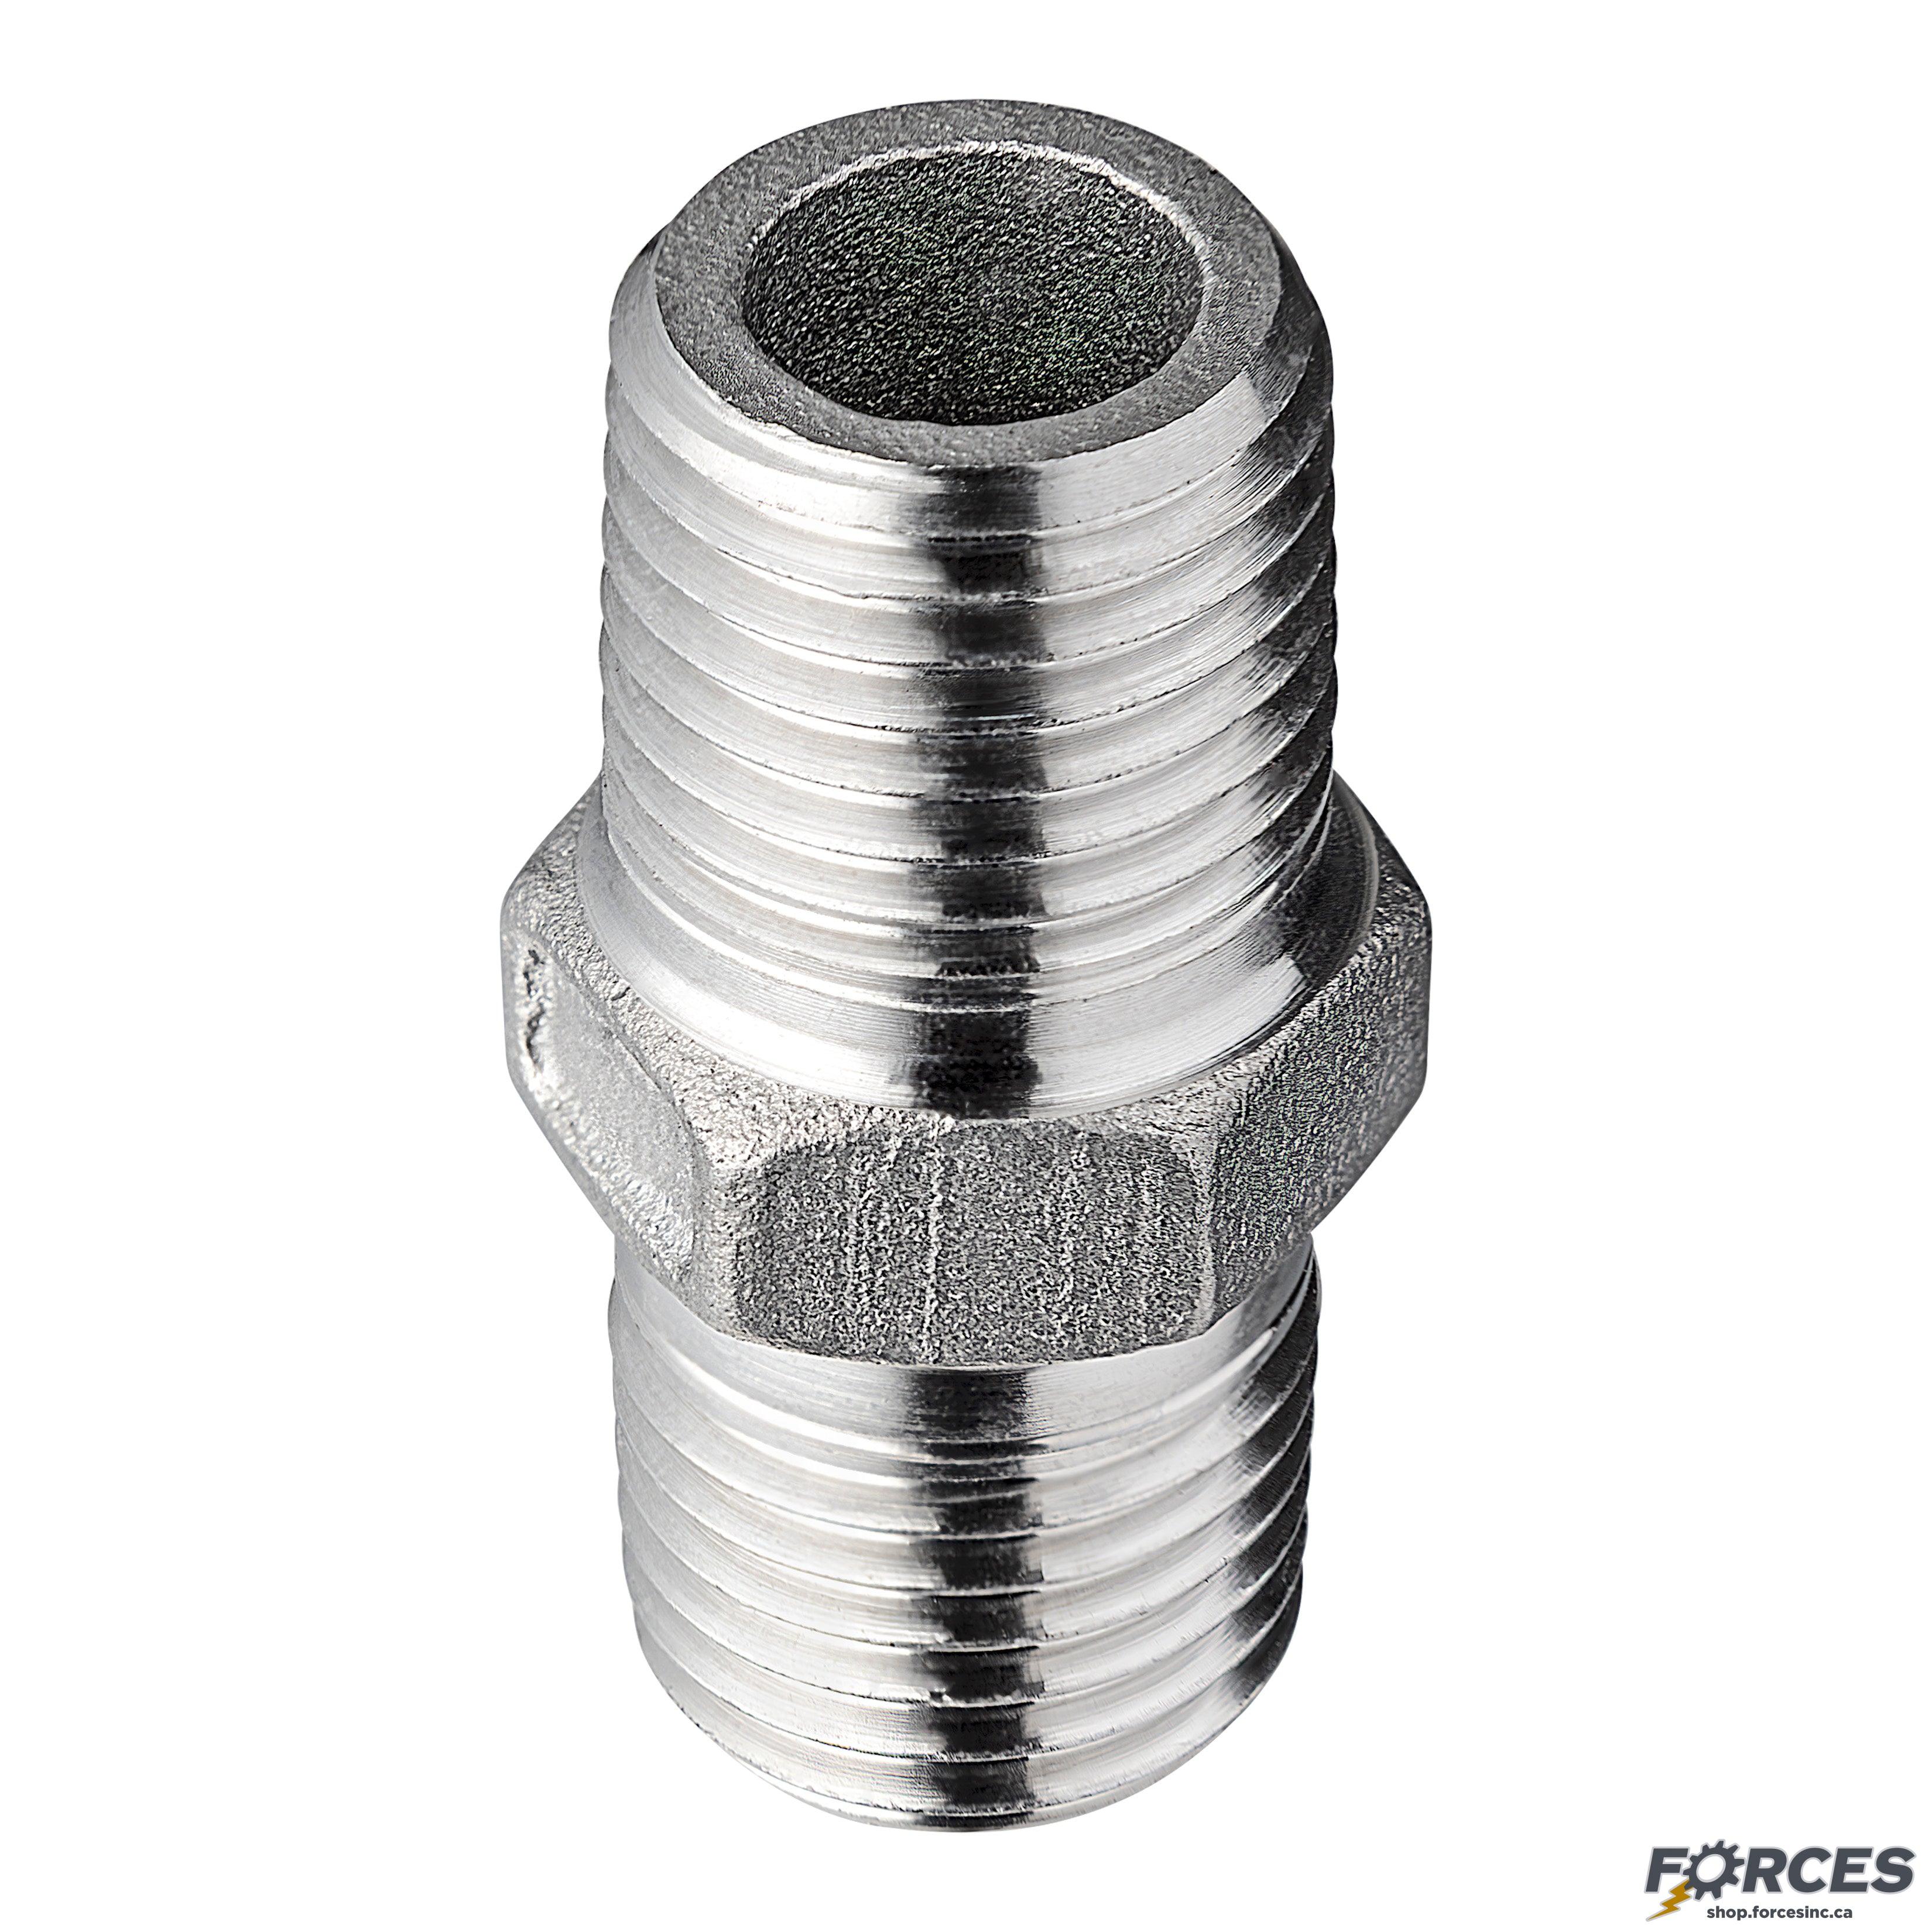 1/2" Hex Nipple NPT #150 - Stainless Steel 316 - Forces Inc